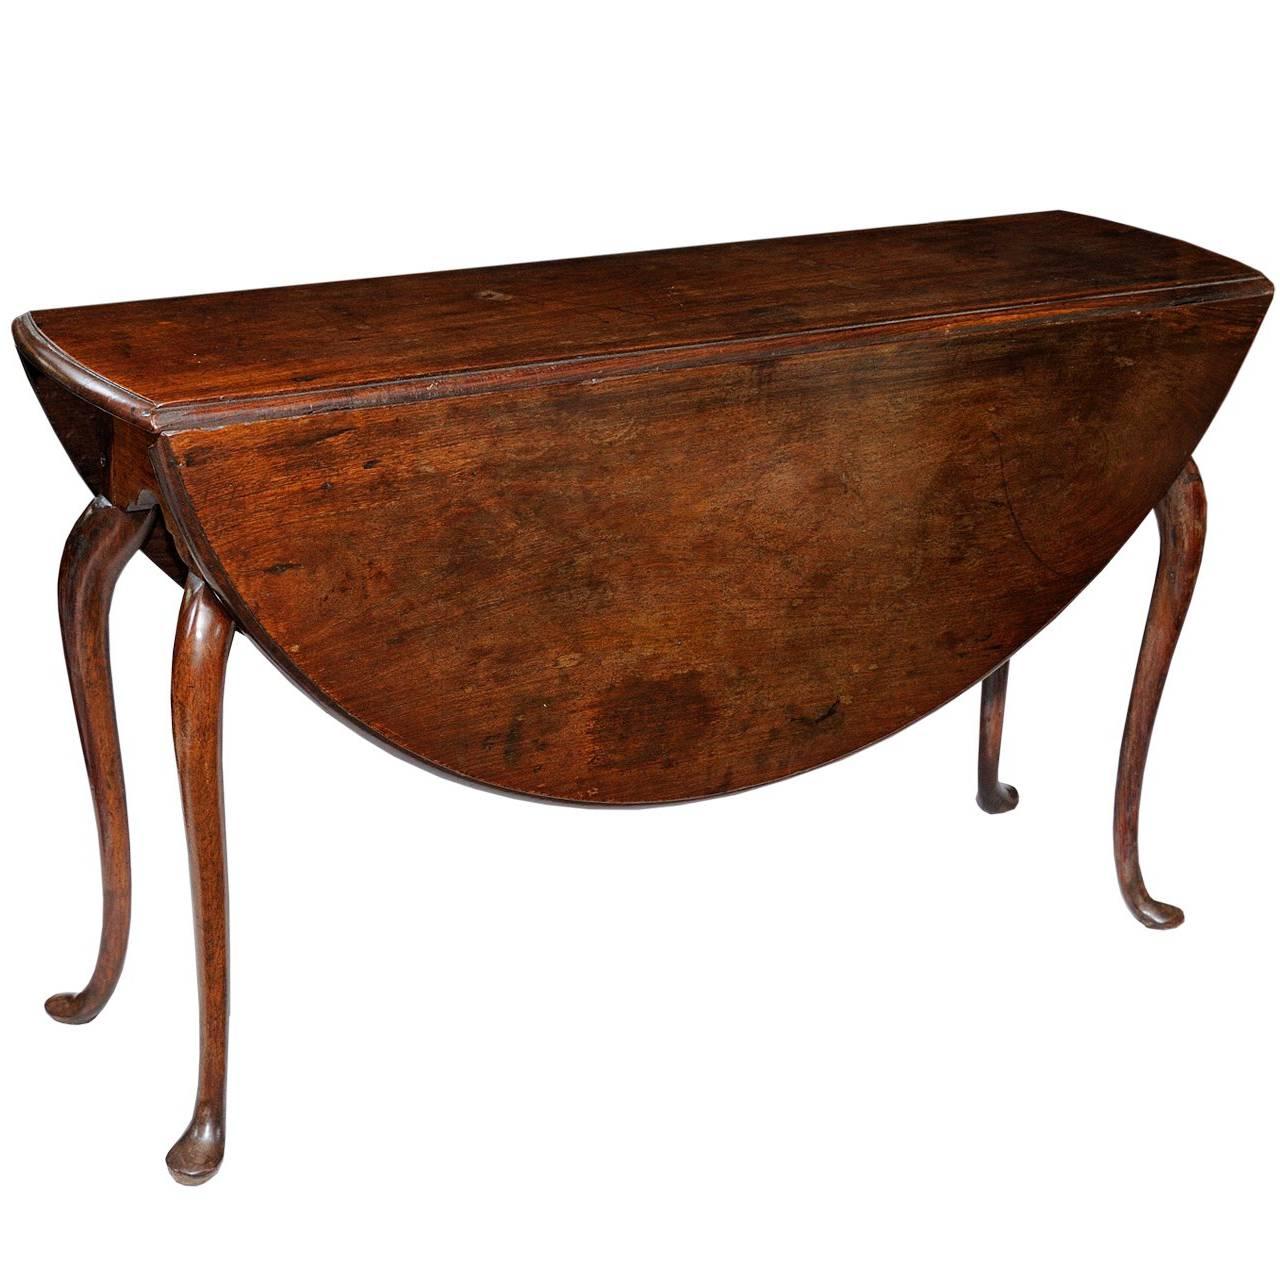 18th Century Anglo Dutch East Indies Padauk Wood Drop-Leaf Table, Circa 1760 For Sale